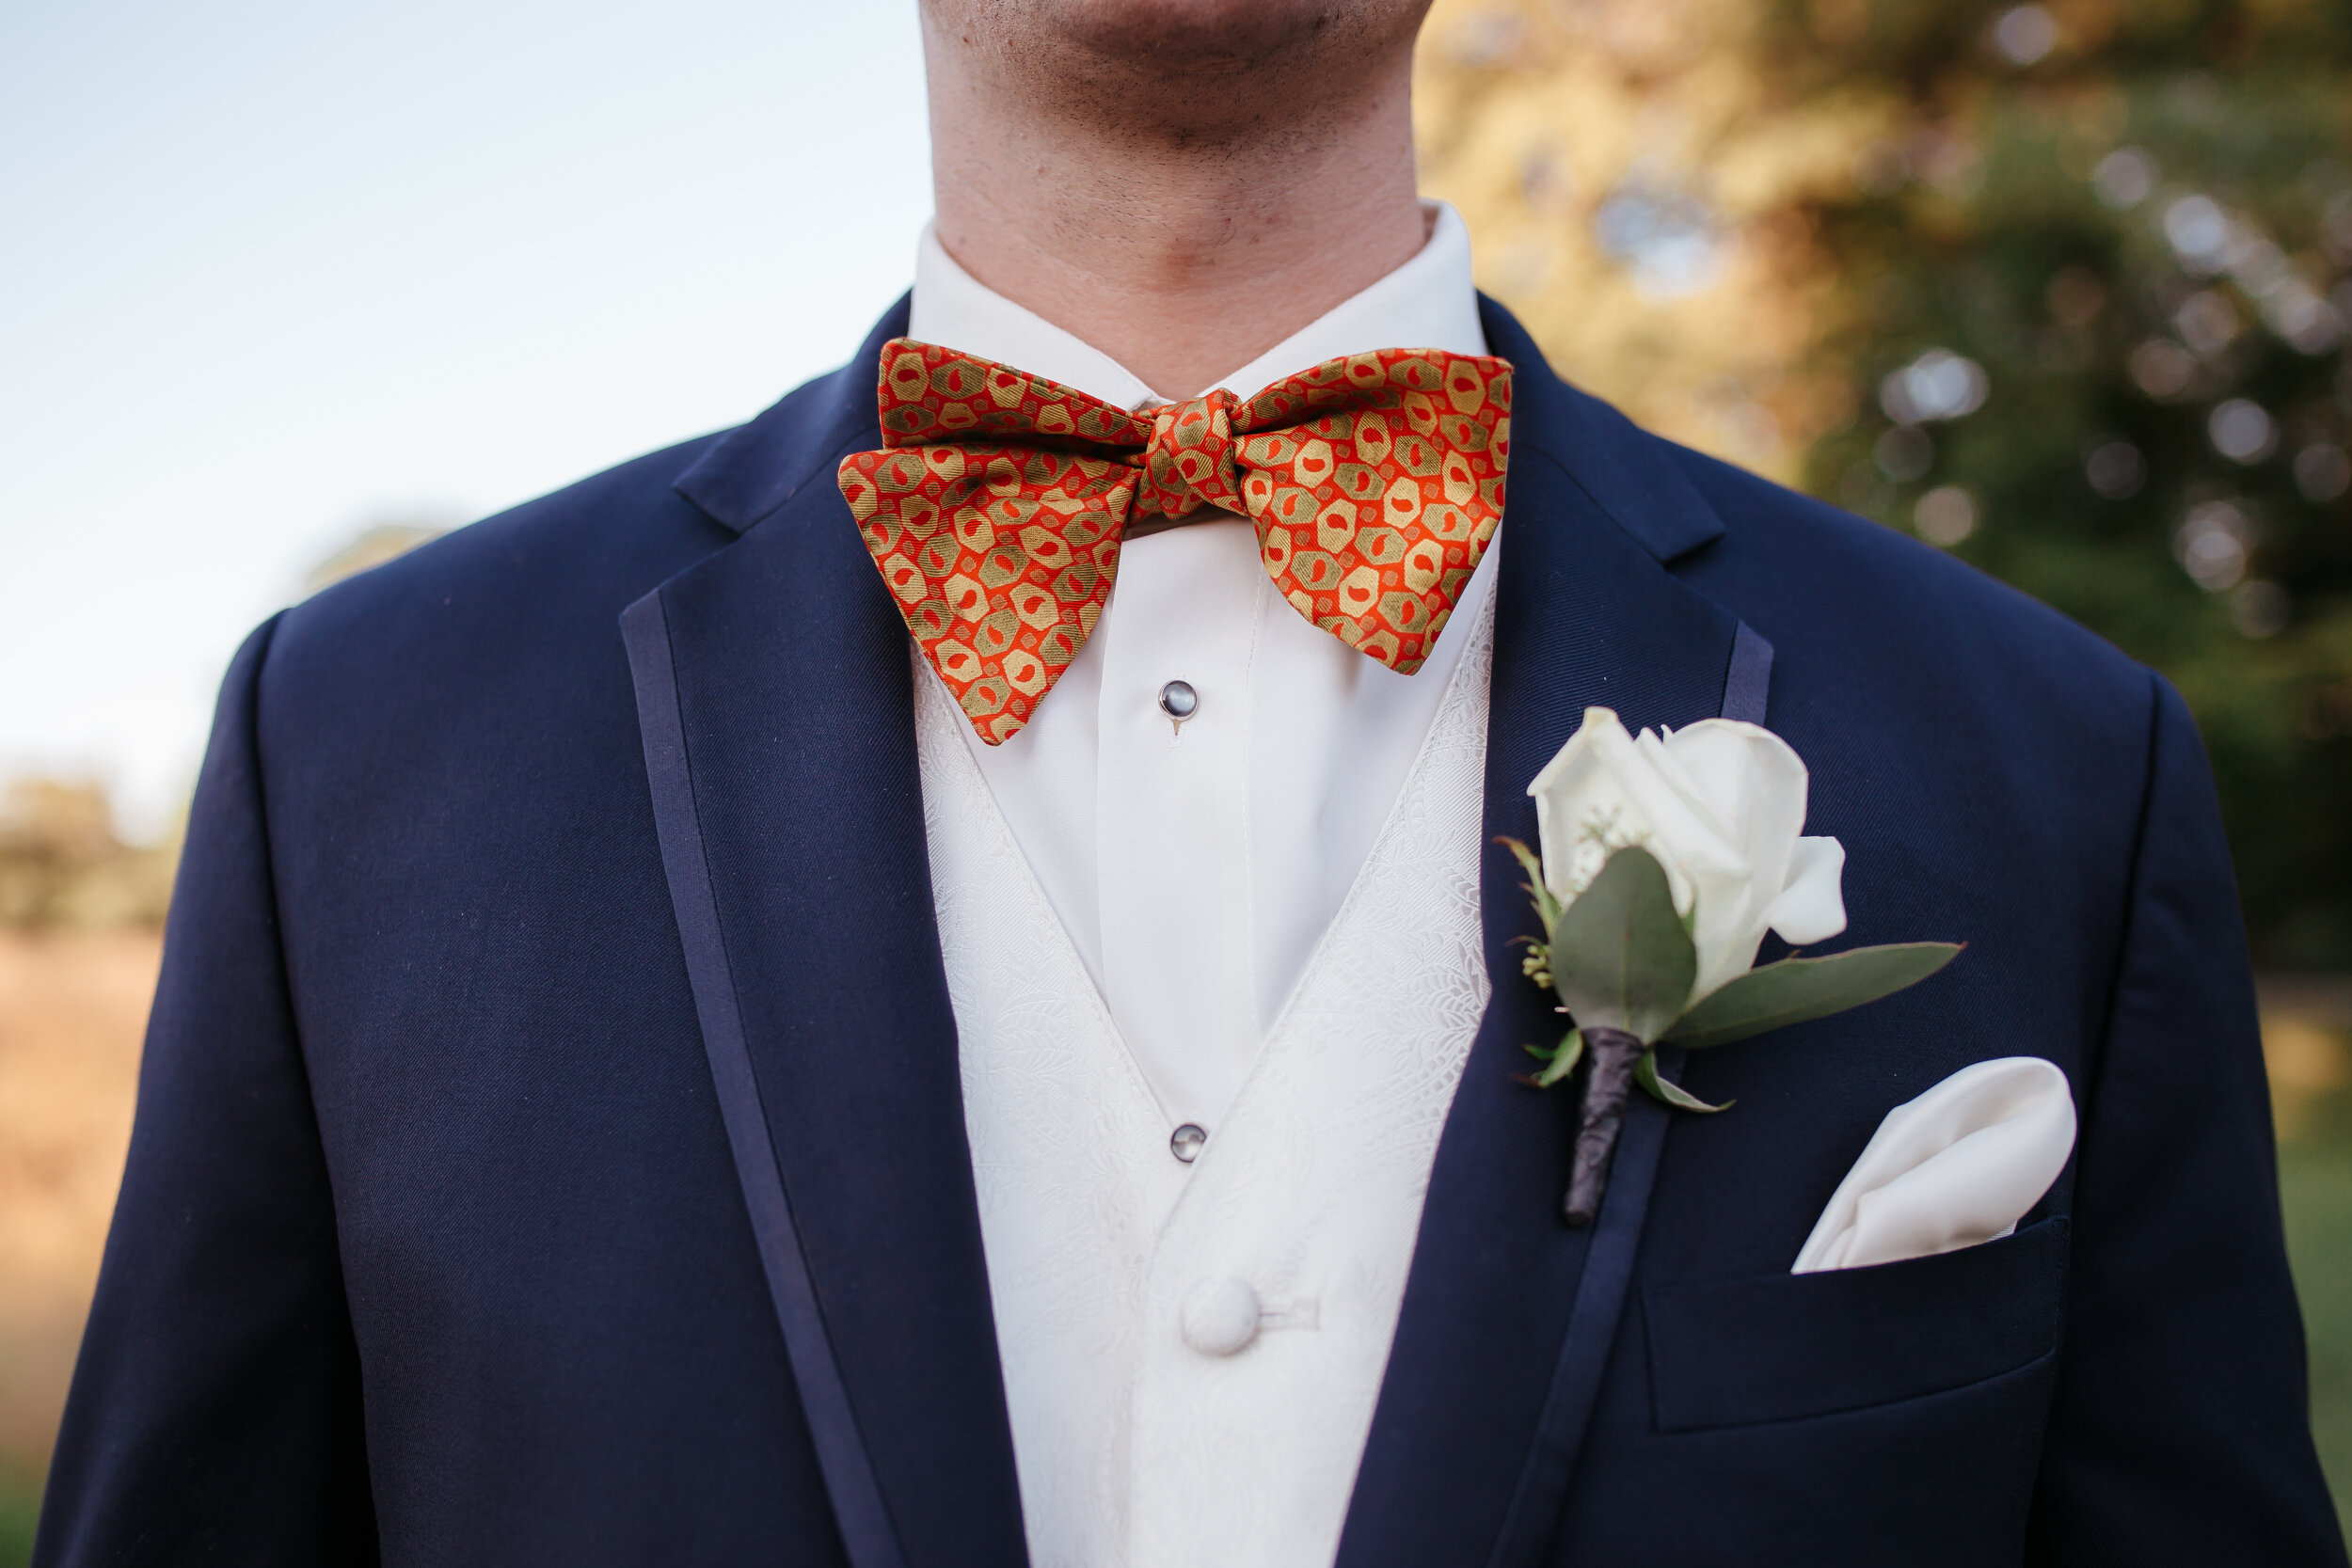 Opt for something that means something, like this groom in his grandfathers tie